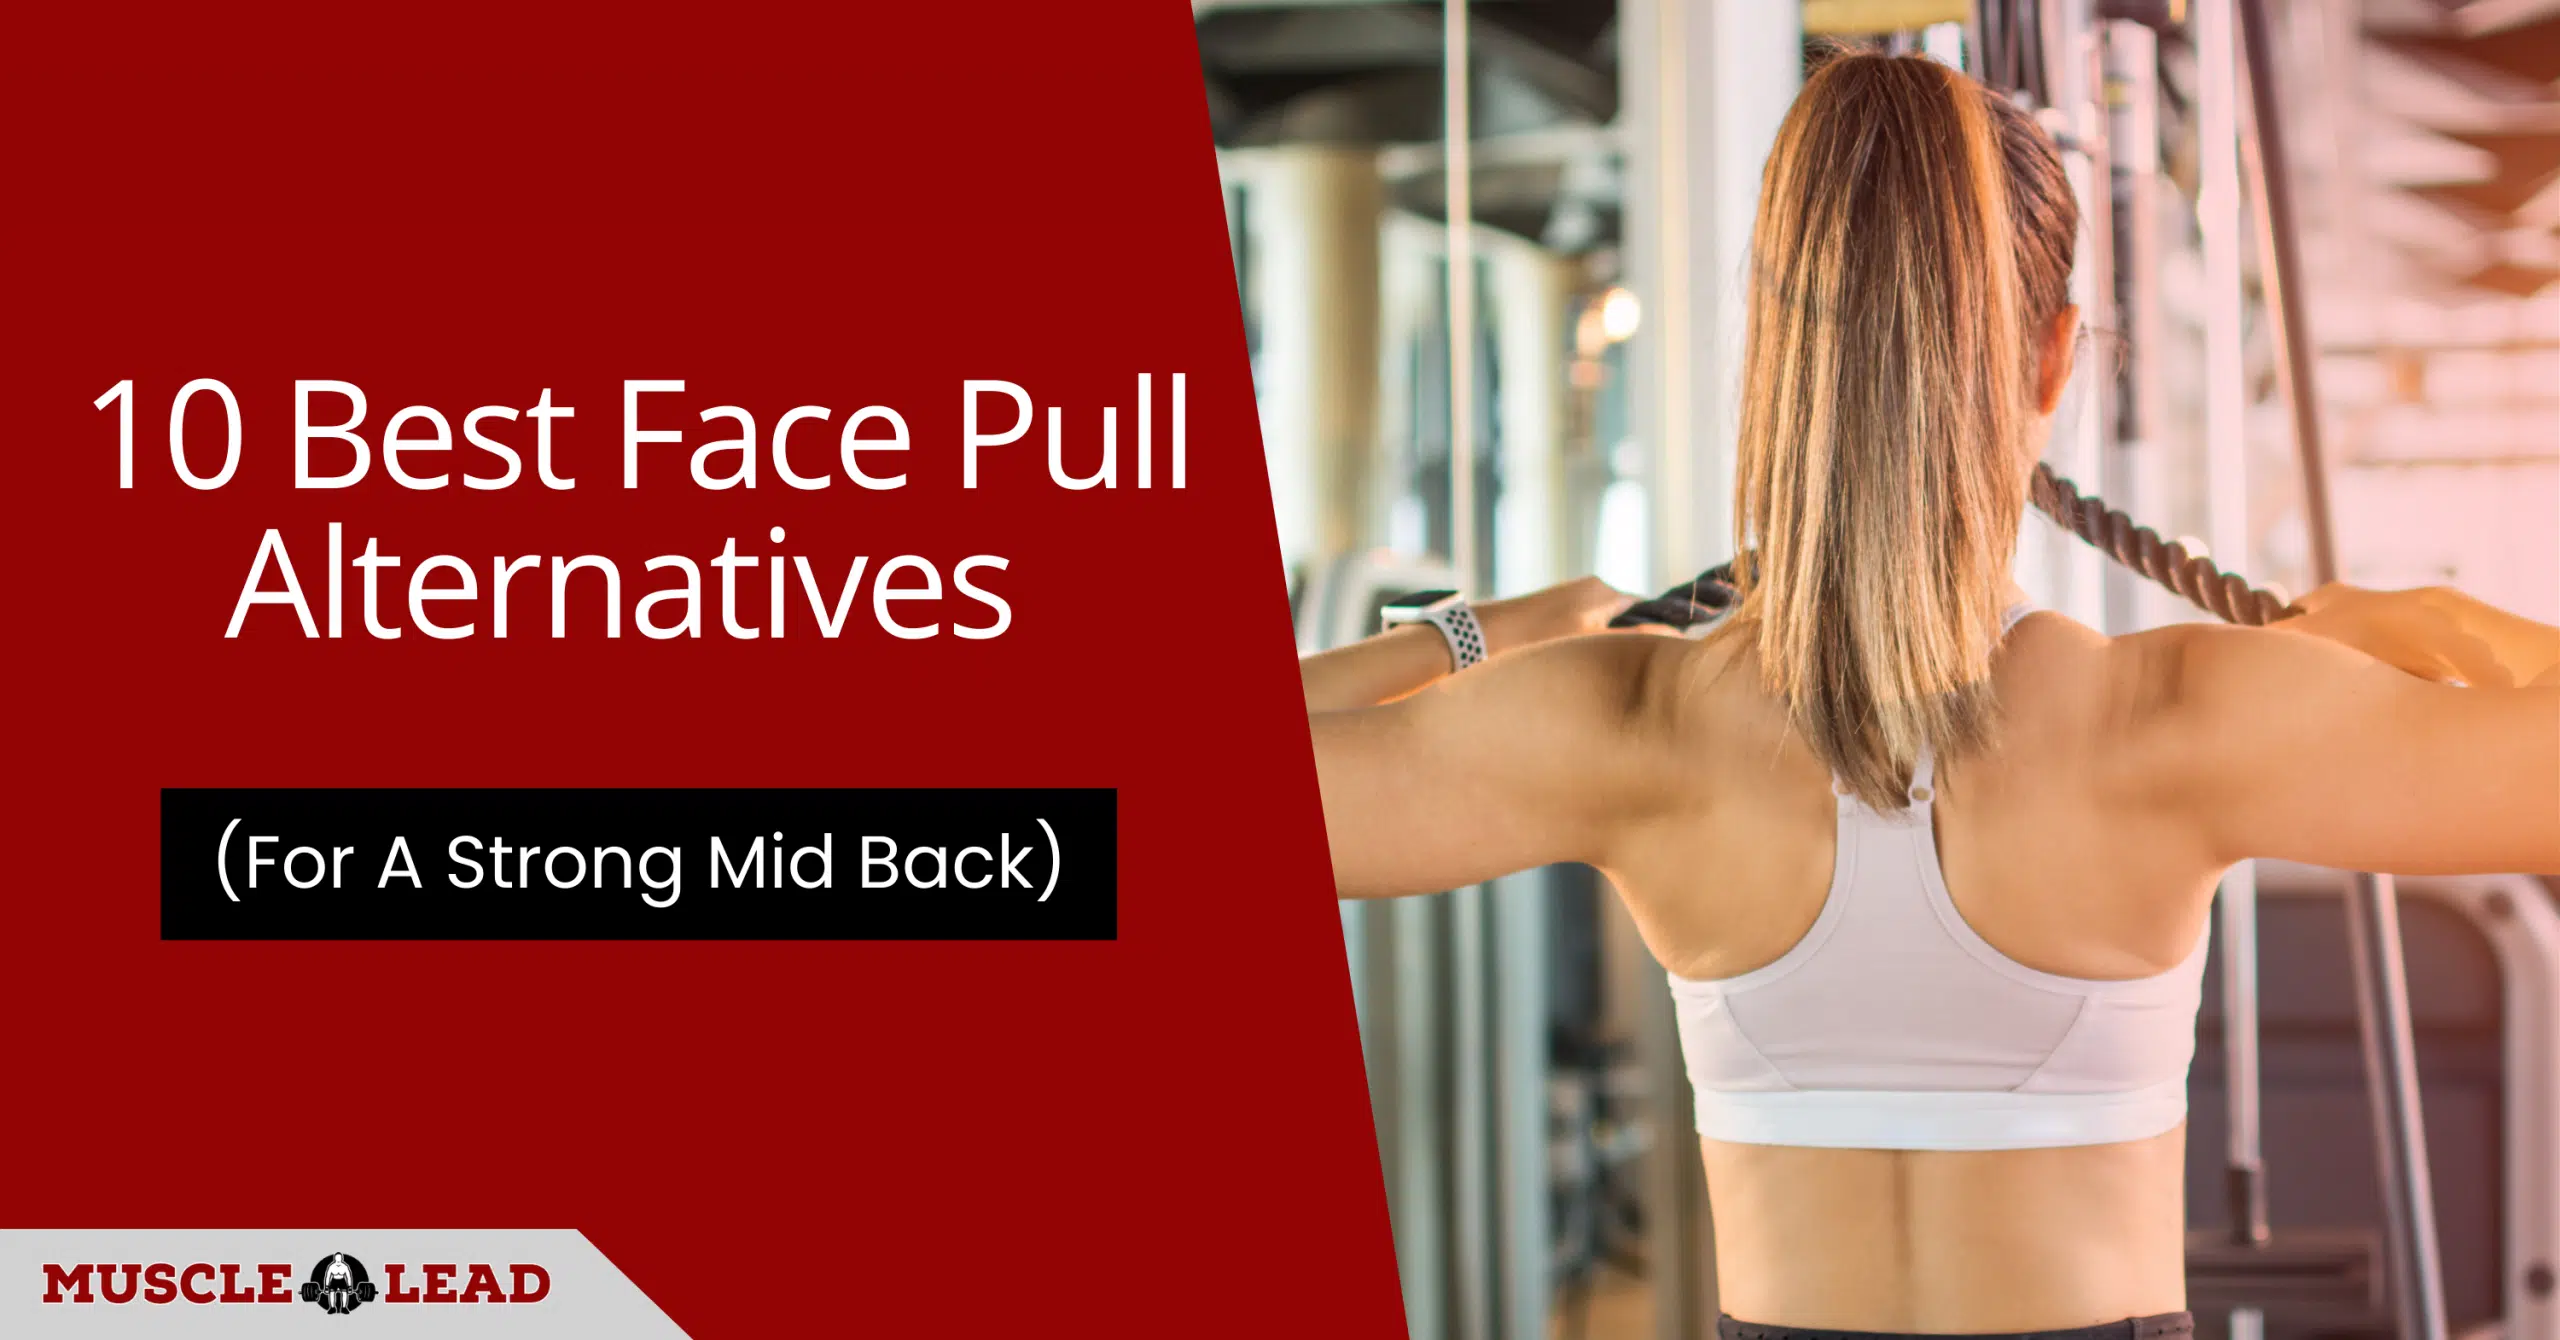 10 Best Face Pull Alternatives For A Strong Mid Back